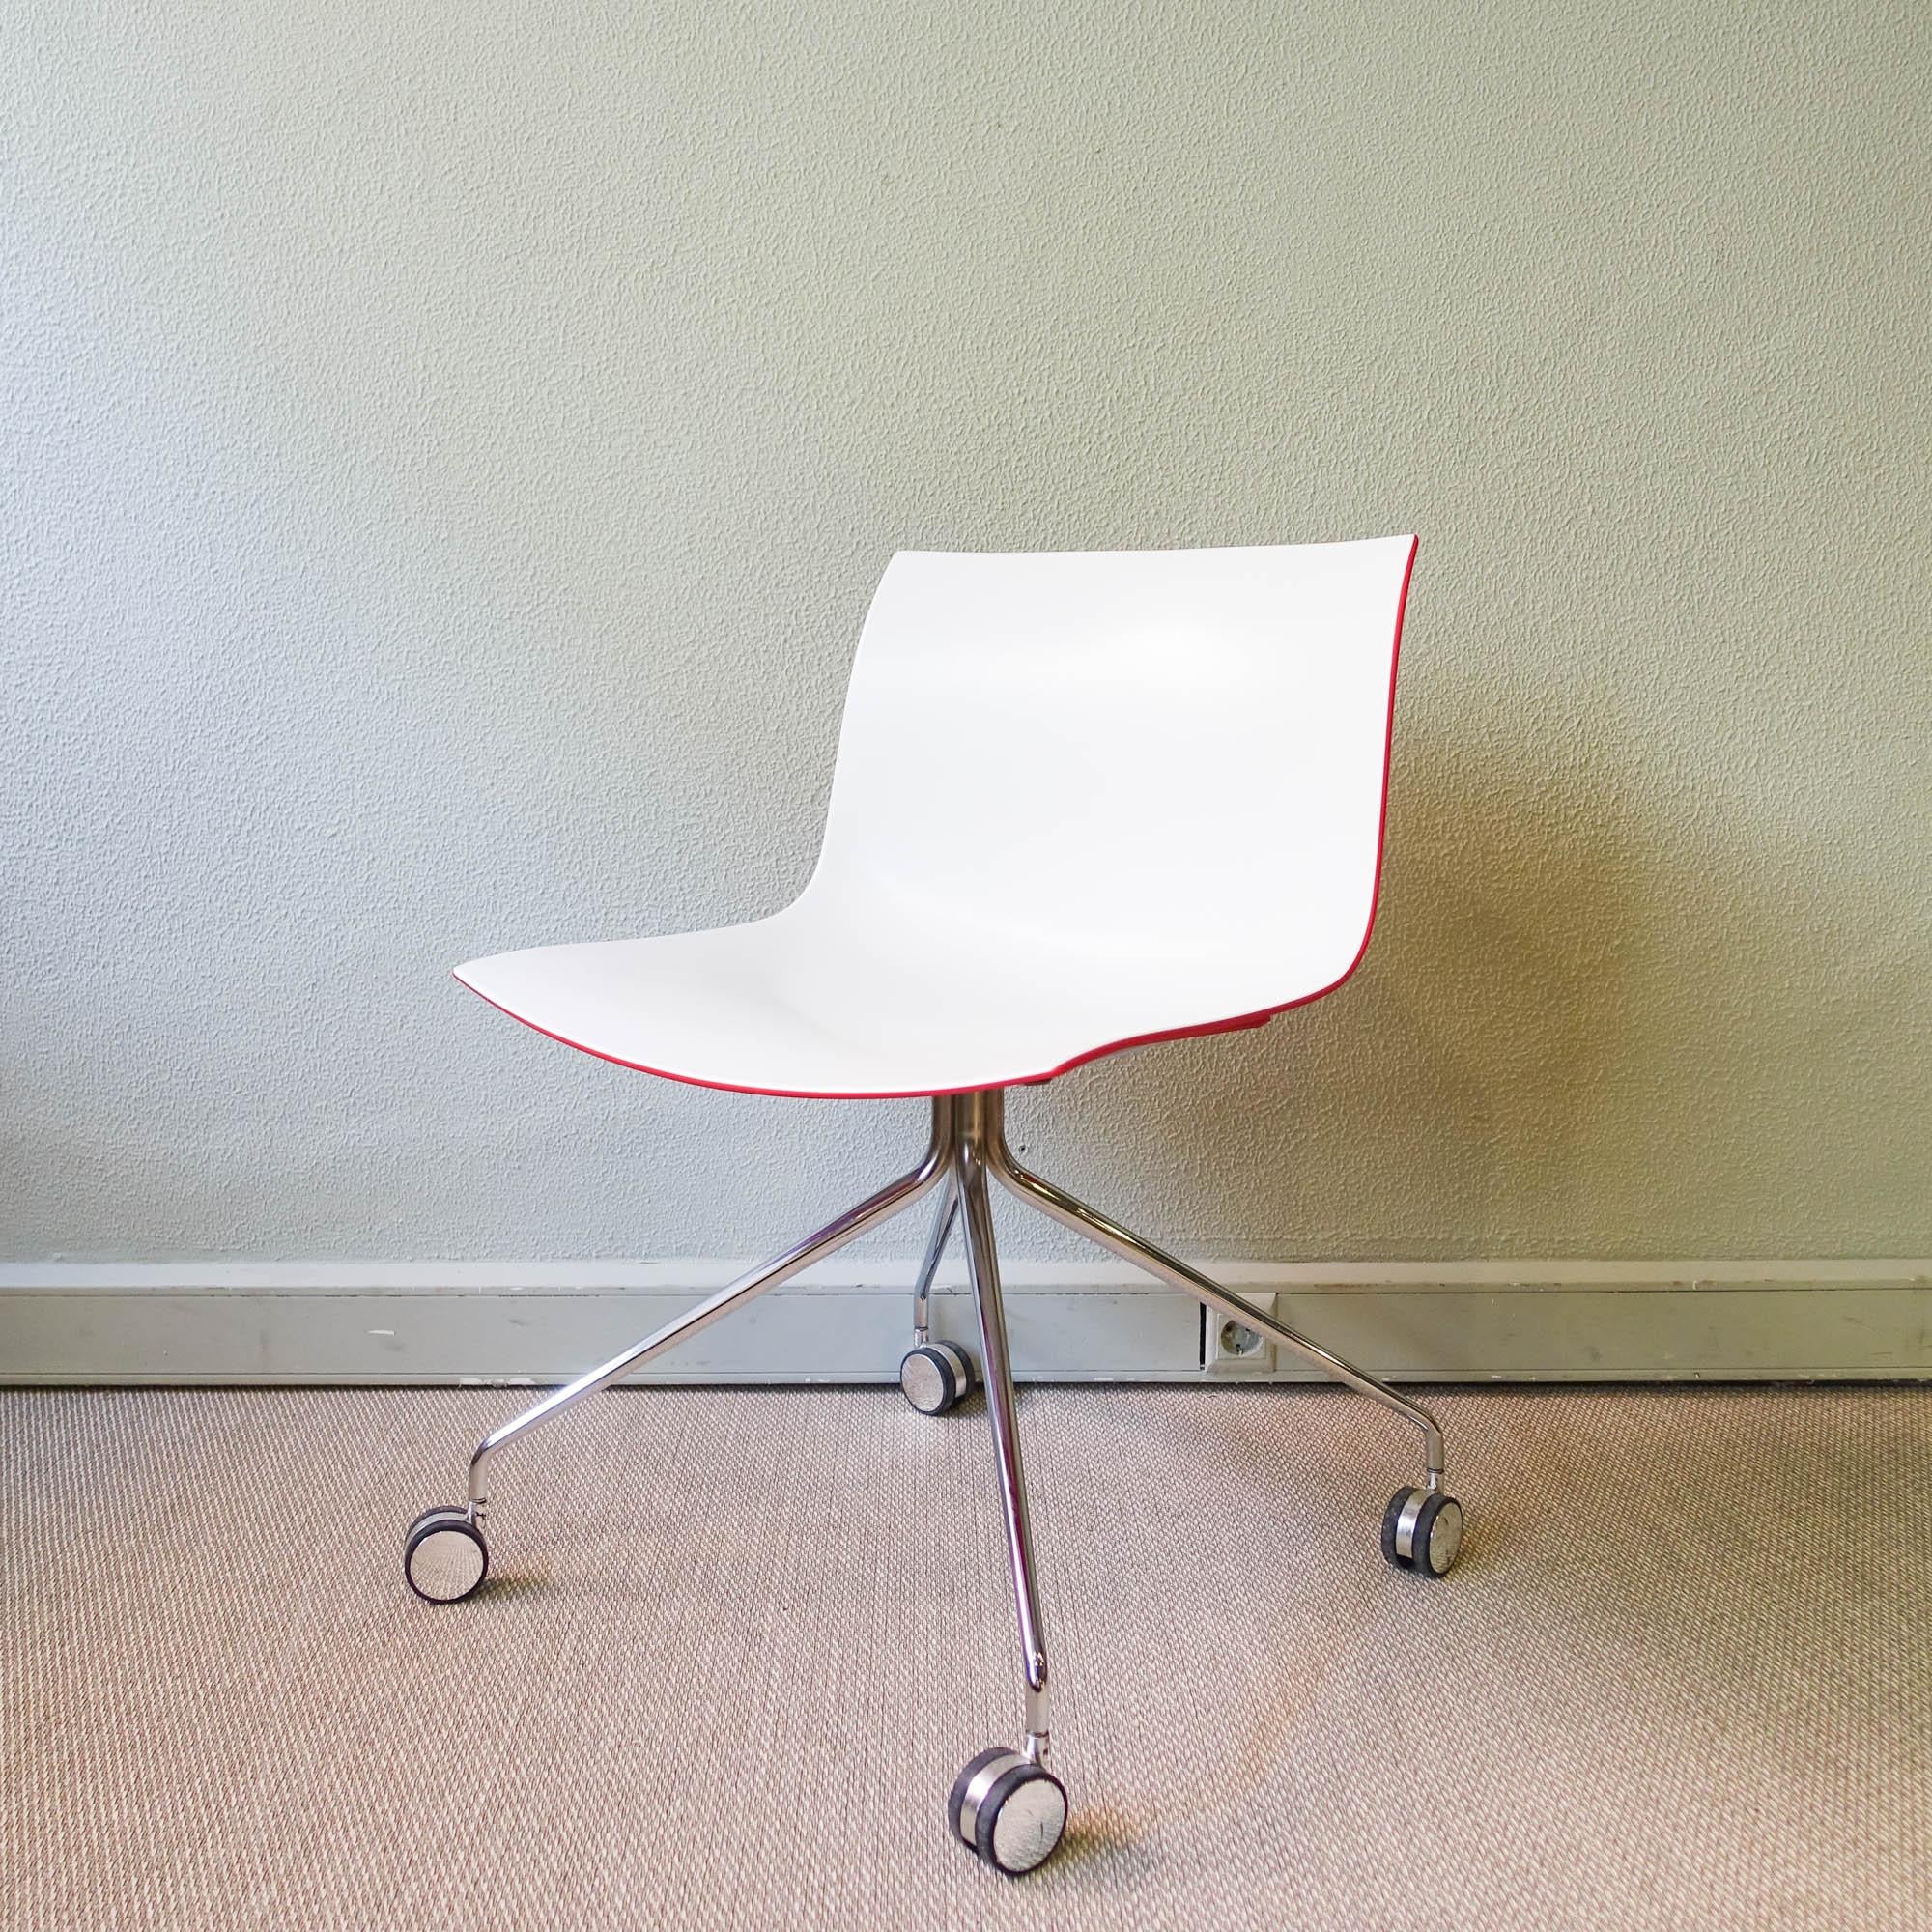 Steel Catifa Desk Chair by  Studio Lievore Altherr Molina for Arper, 2004 For Sale